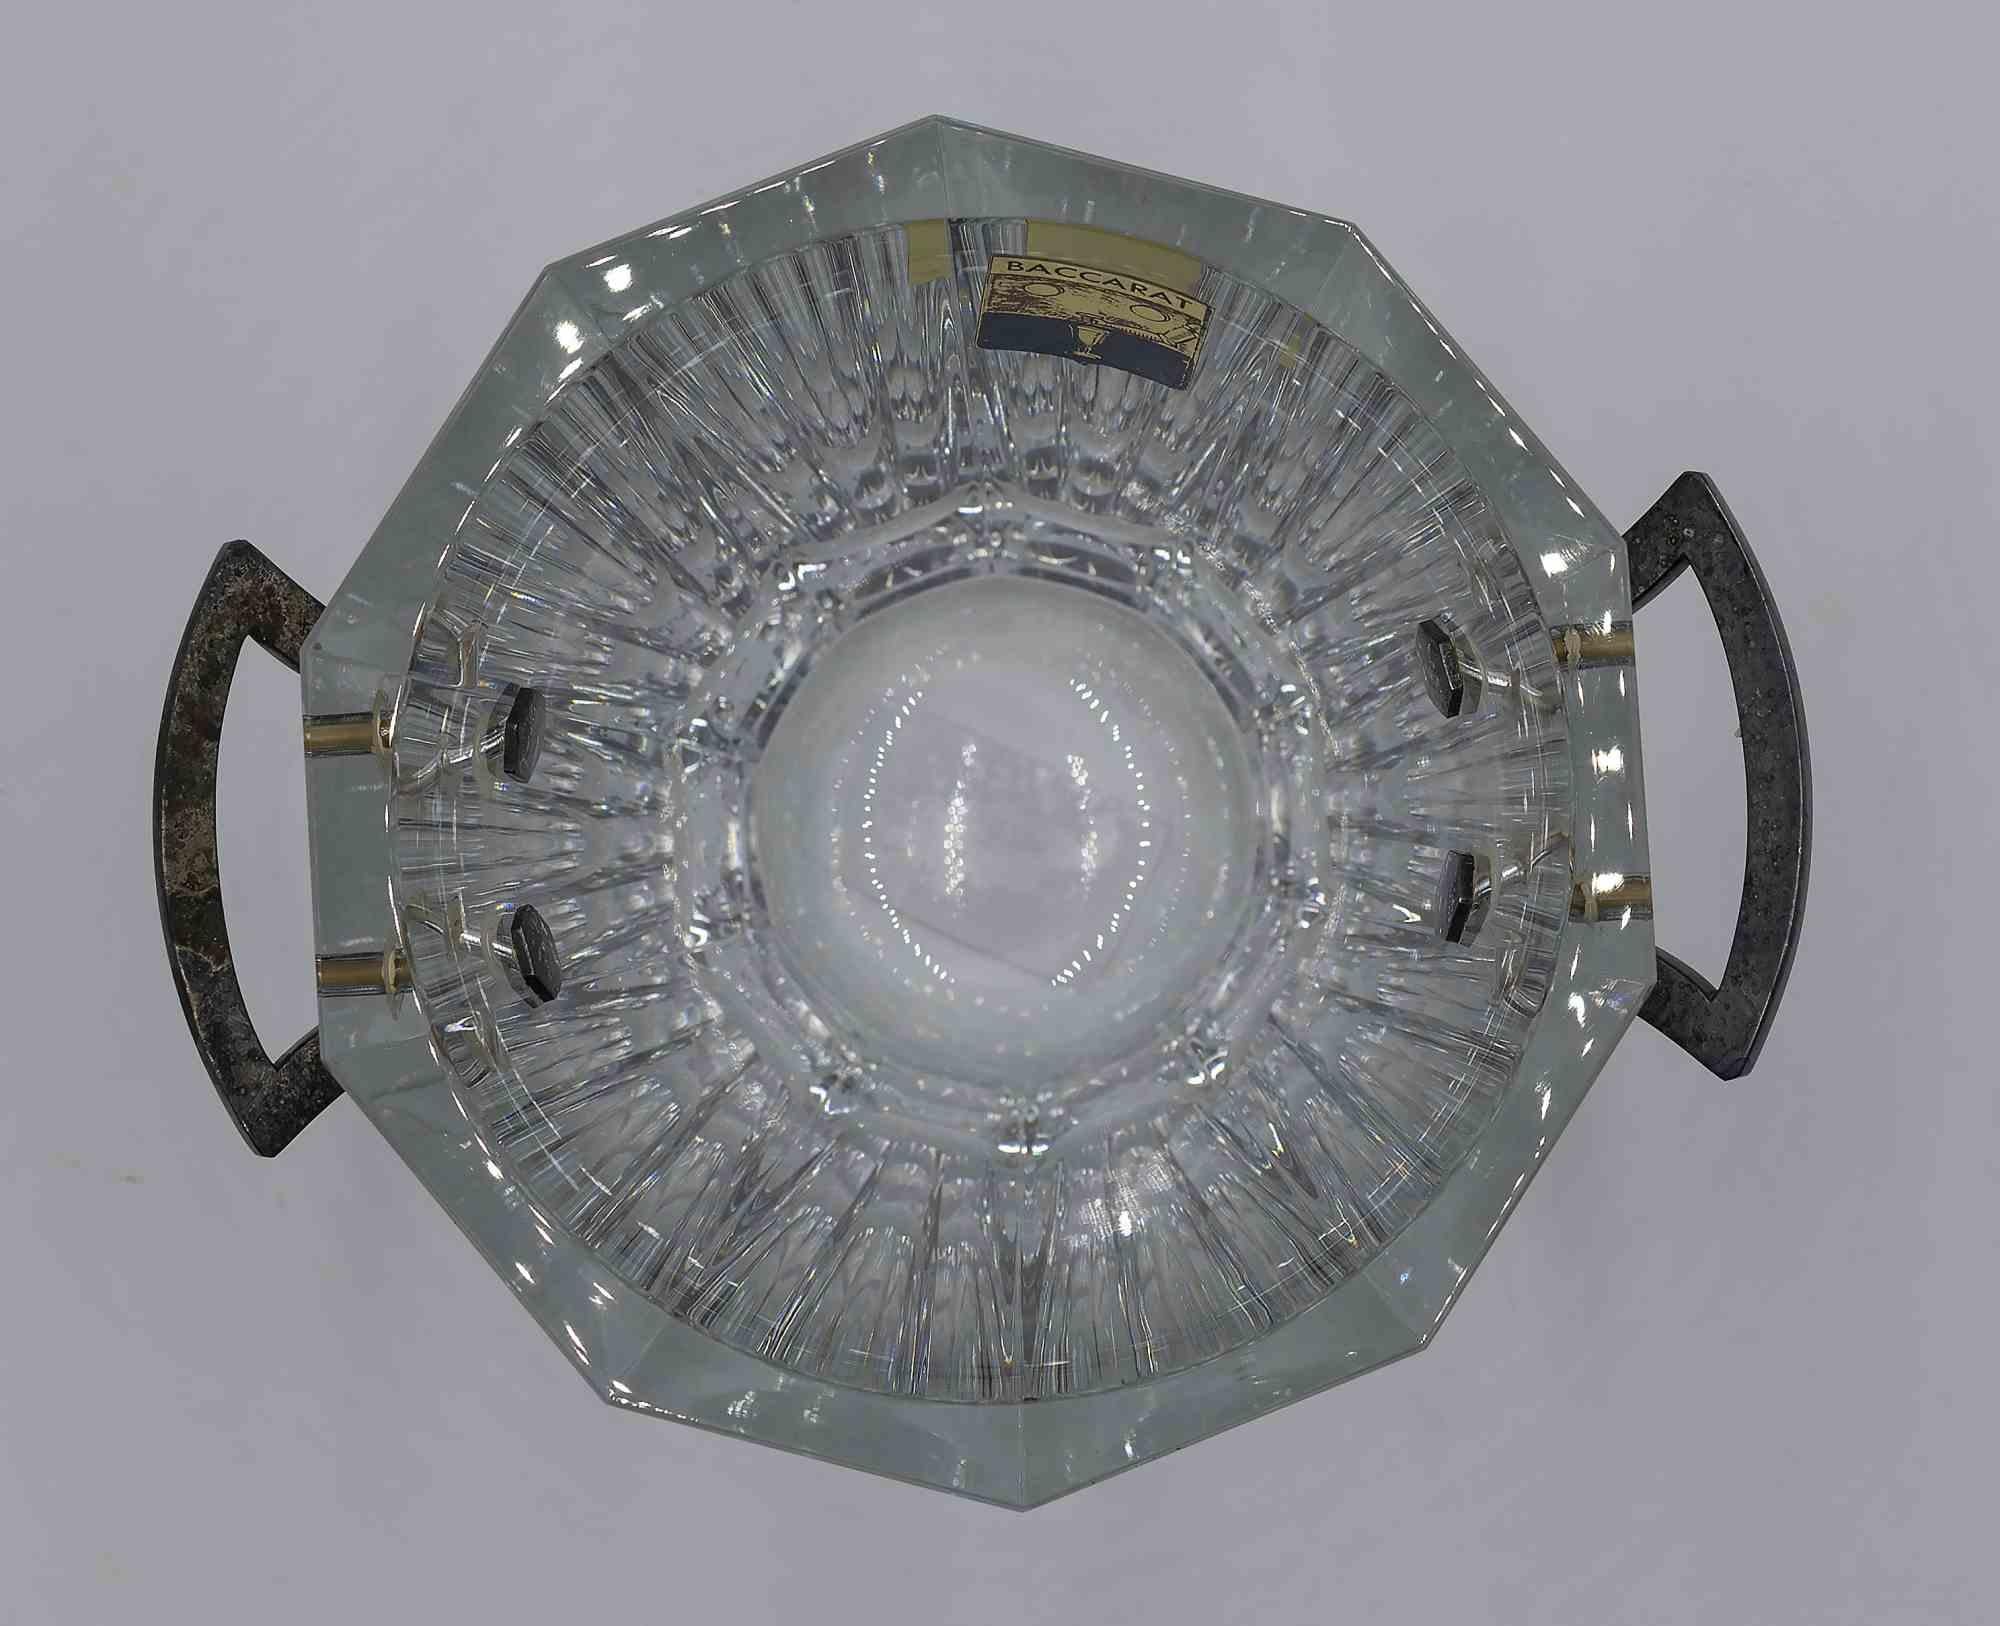 Baccarat ice bucket is an original decorative object realized by Baccarat manufacture in the 1970s.

Ice bucket entirely realized in crystal. 

This iconic Baccarat object is a cult element of the exclusive and refined furnishings.

Thanks to